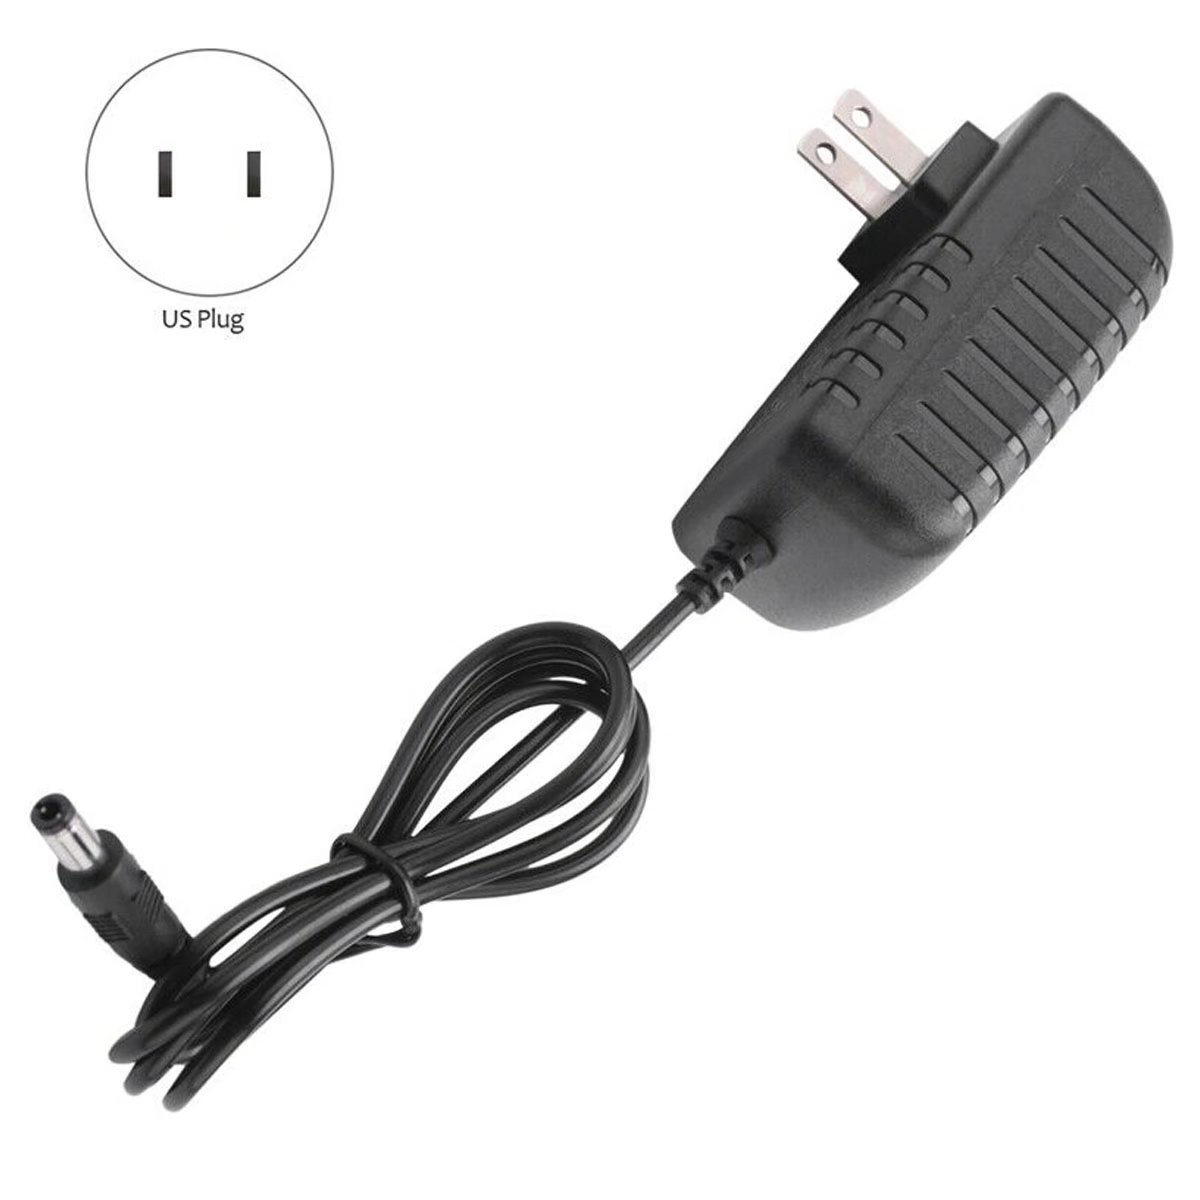 AC Adapter Charger for 18V Legiral Le9 Pro (NOT fit 24V Version) Massage Gun Deep Tissue Body Muscle Percussi - image 3 of 4